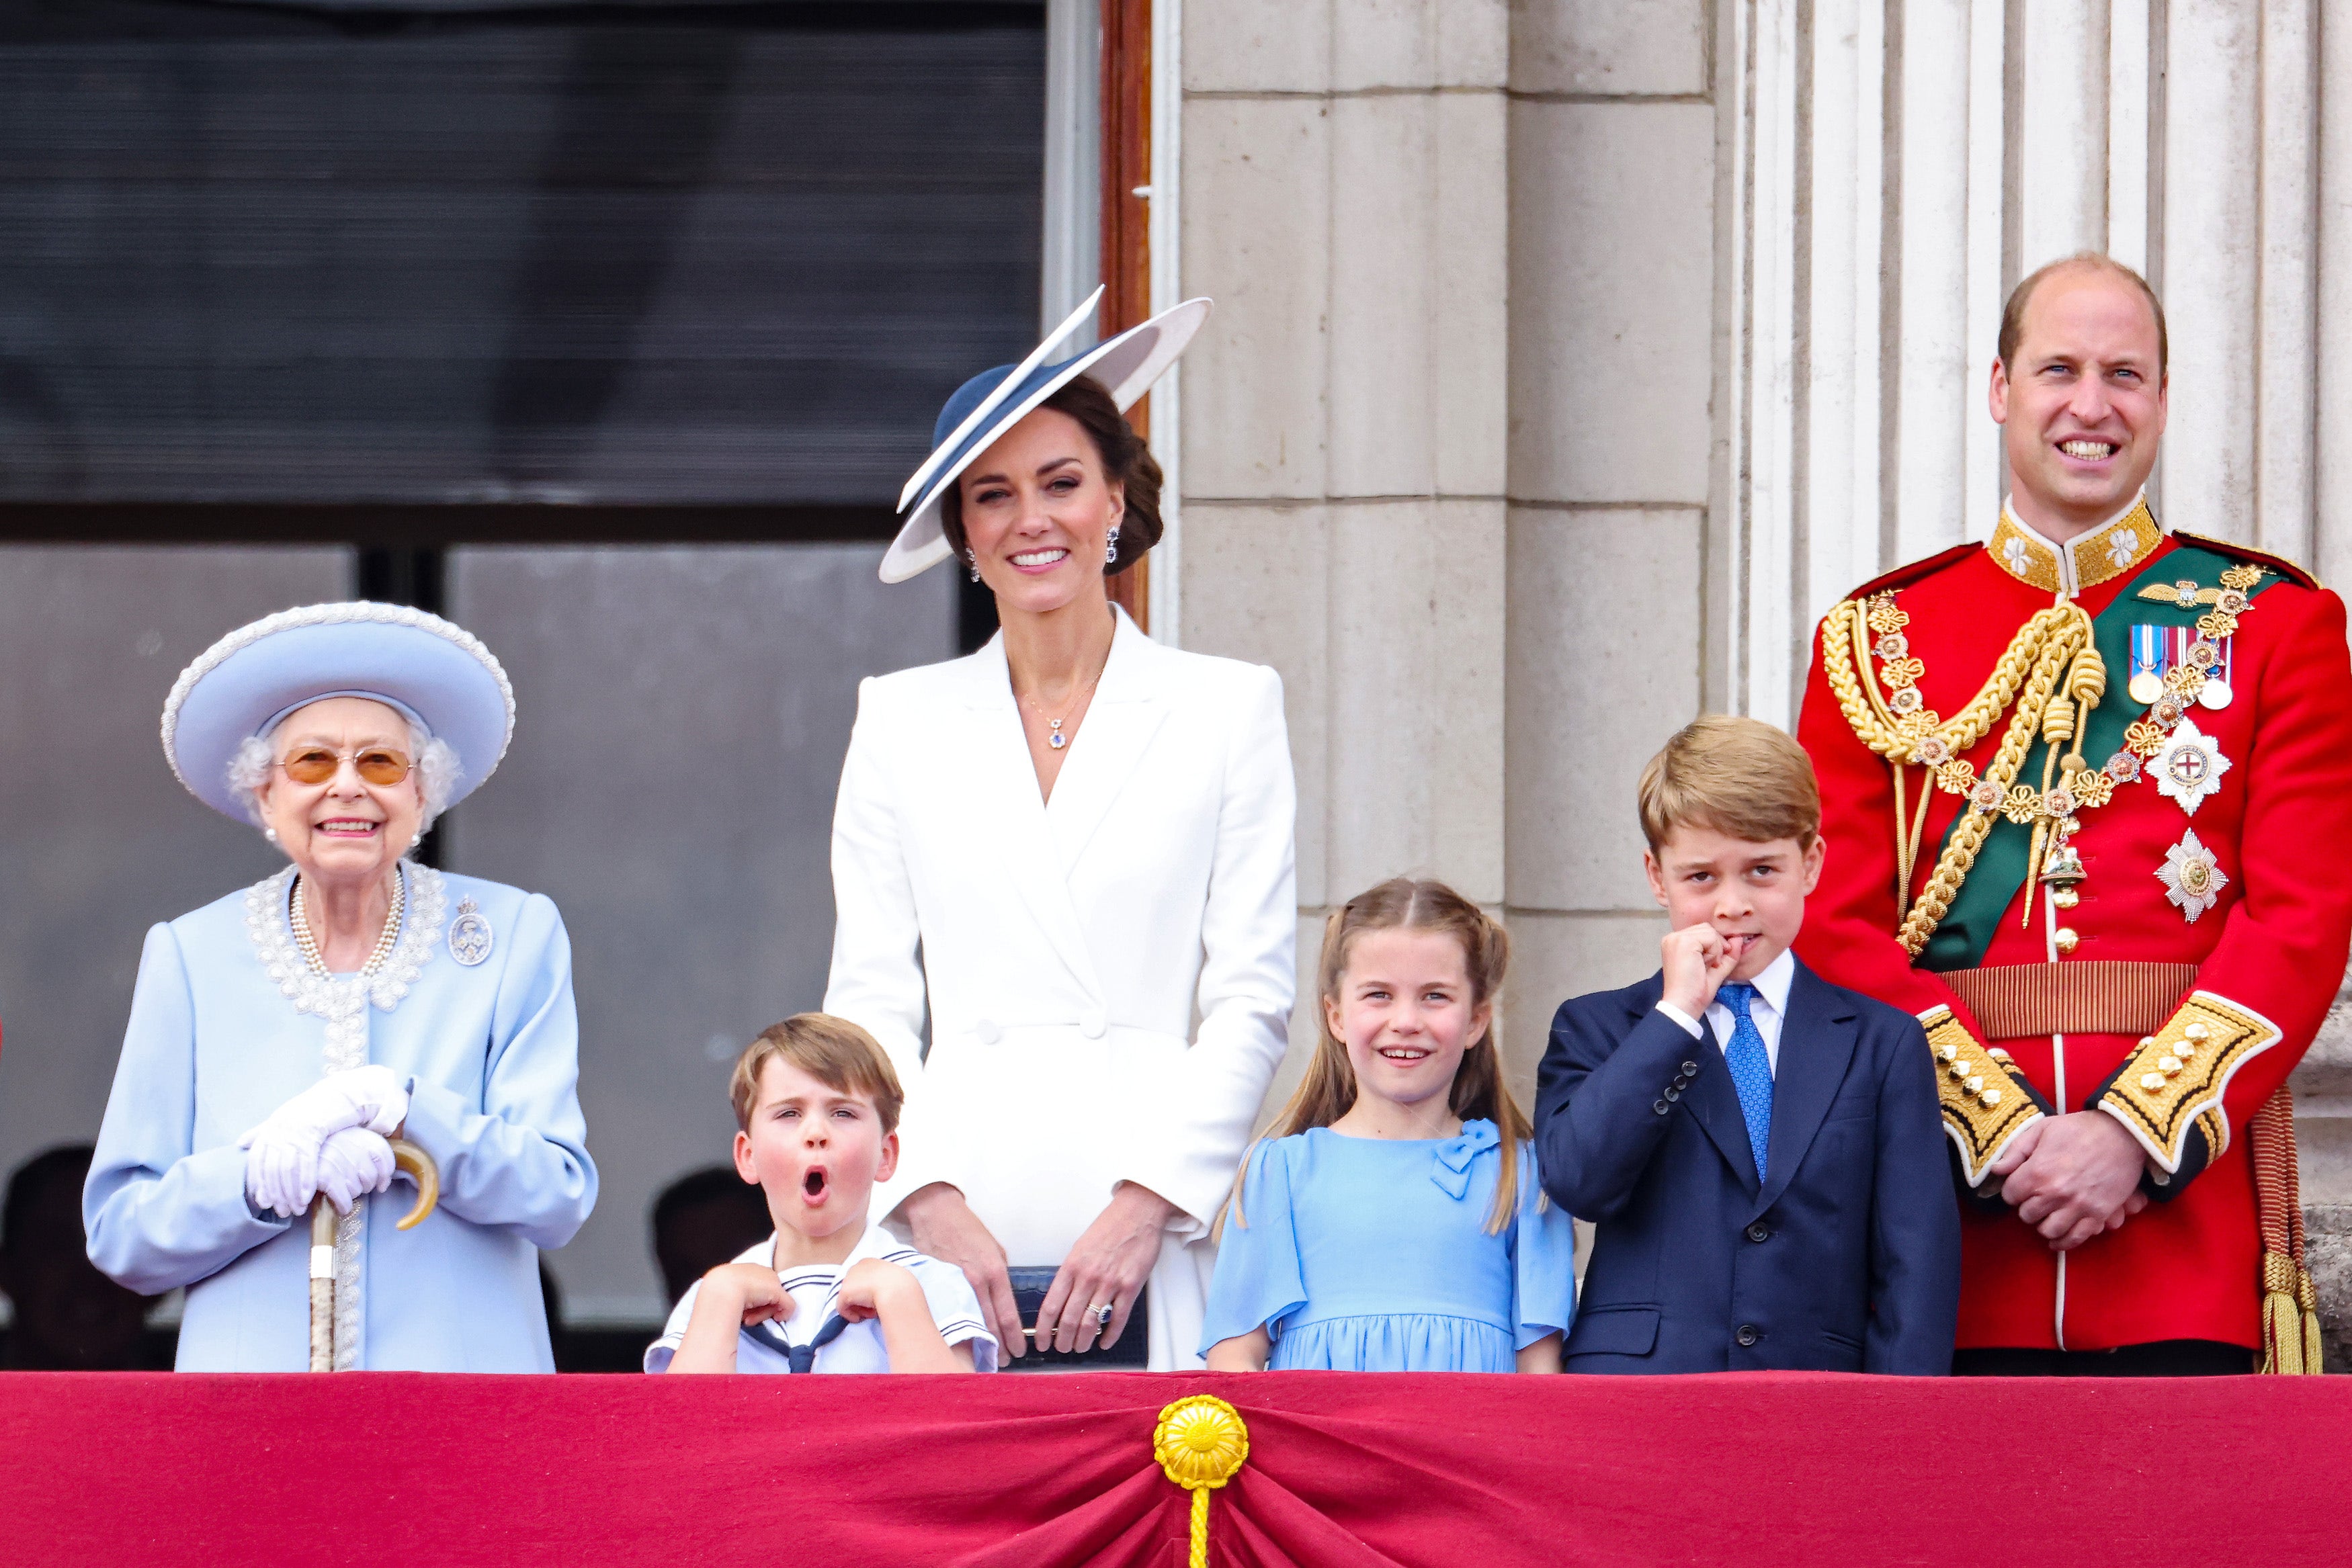 Queen Elizabeth celebrated by Prince William, Kate Middleton one year